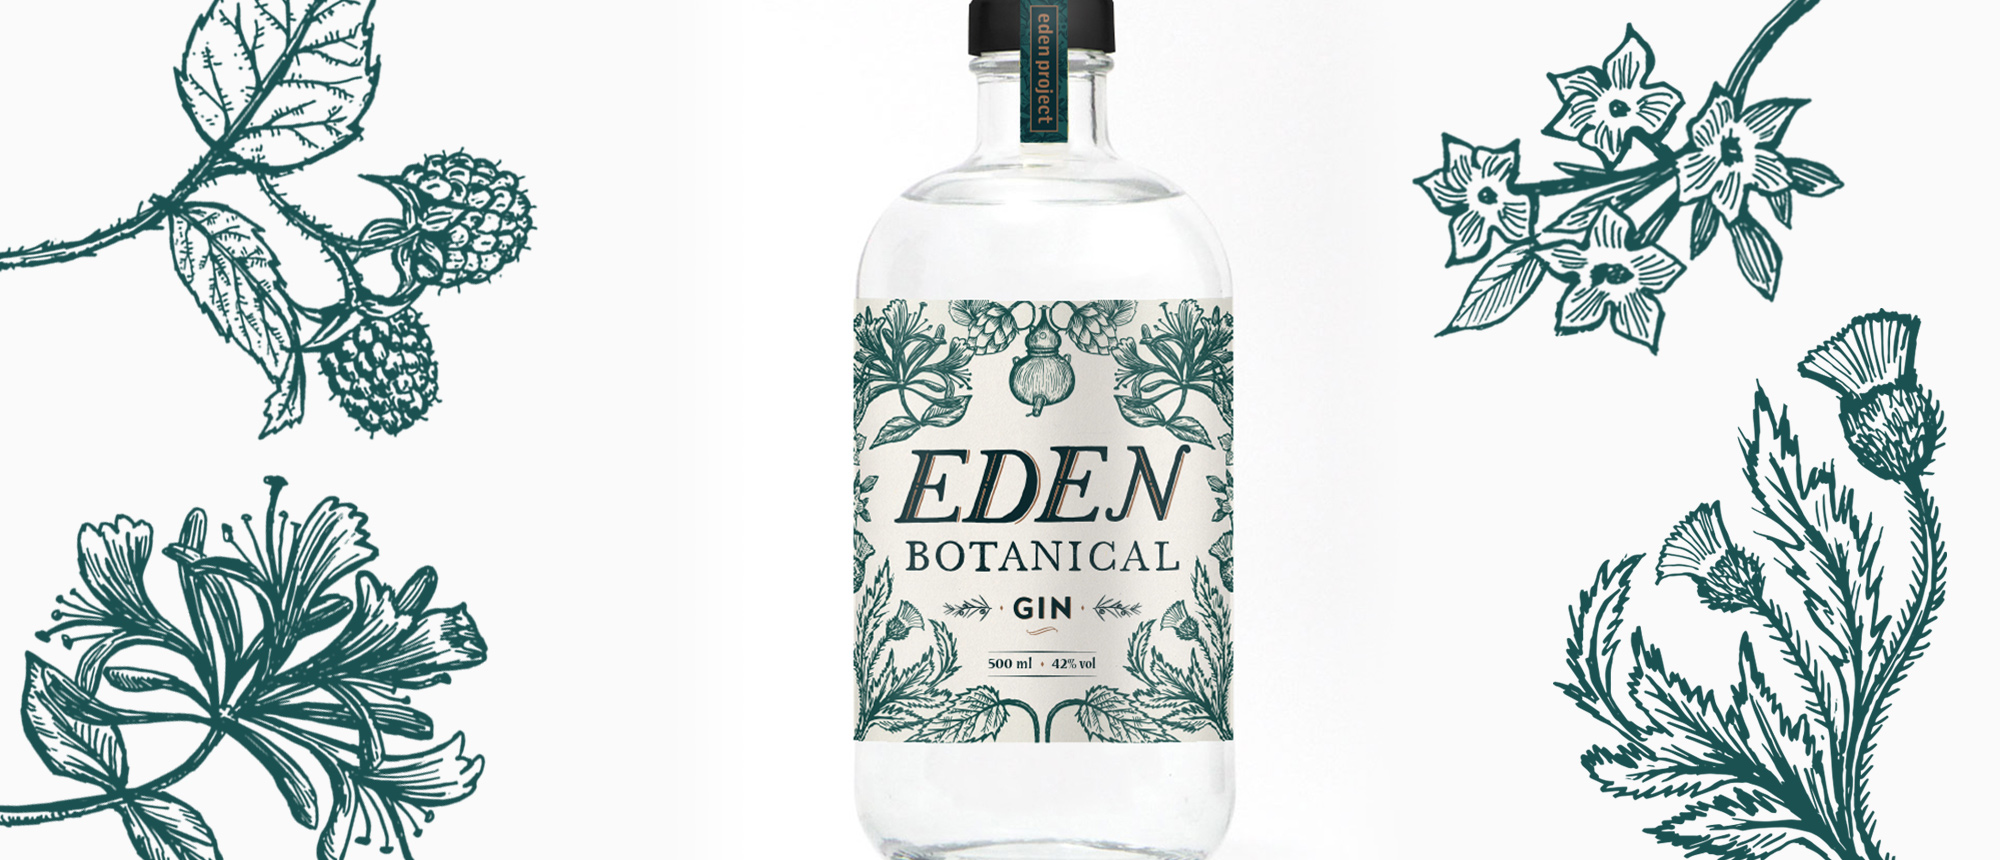 Gin packaging and label design by Wild Bear Designs